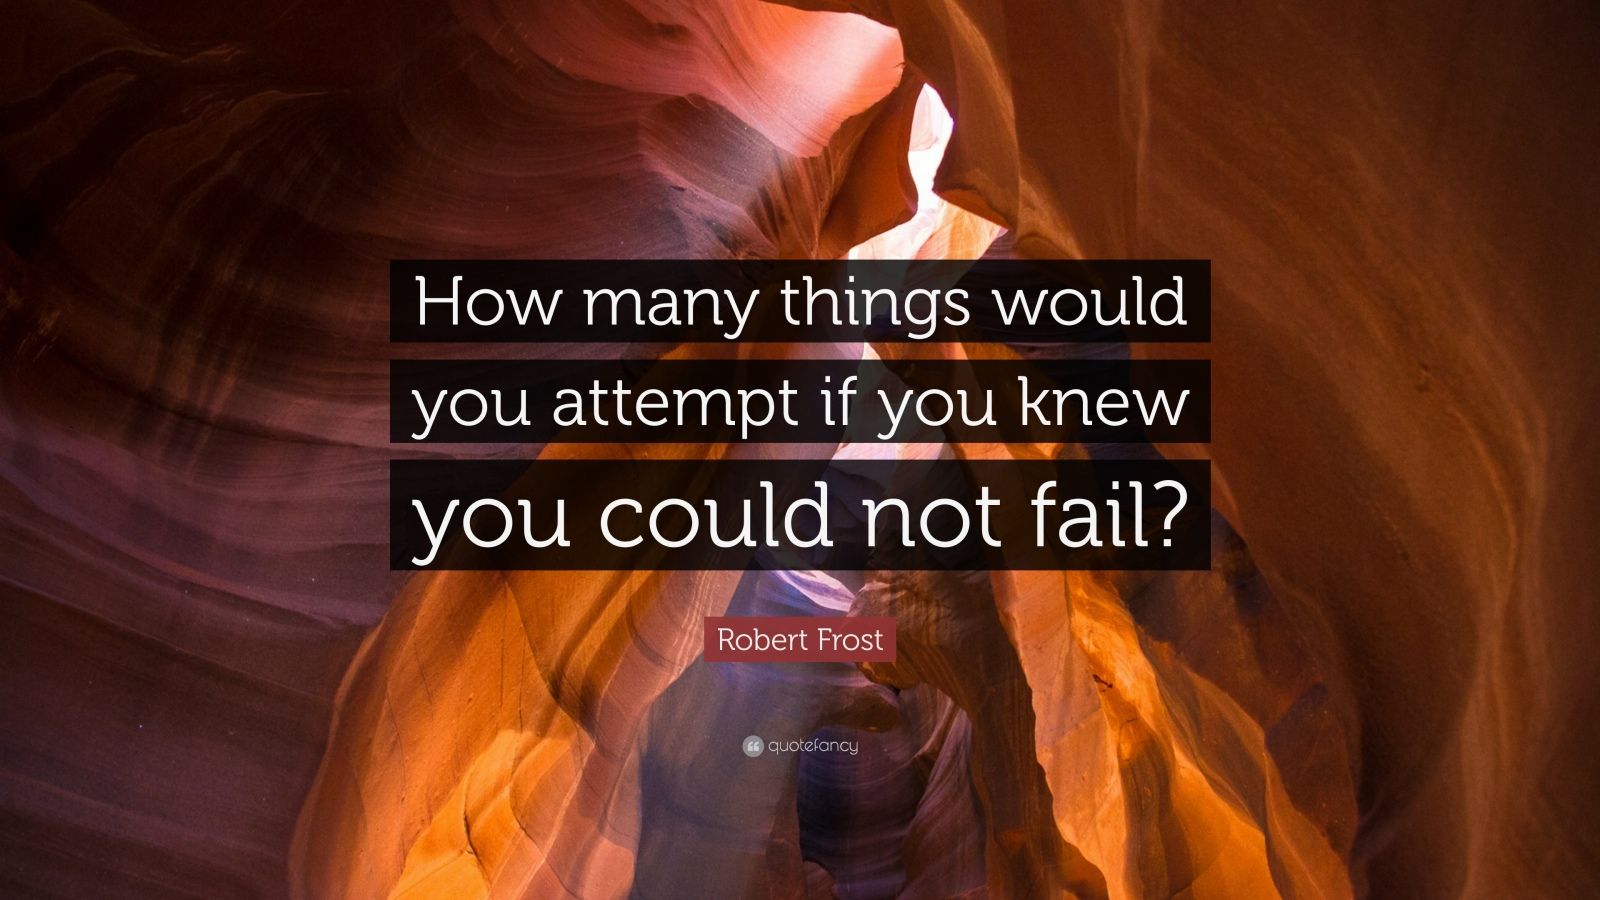 Robert Frost Quote: “How many things would you attempt if you knew you ...